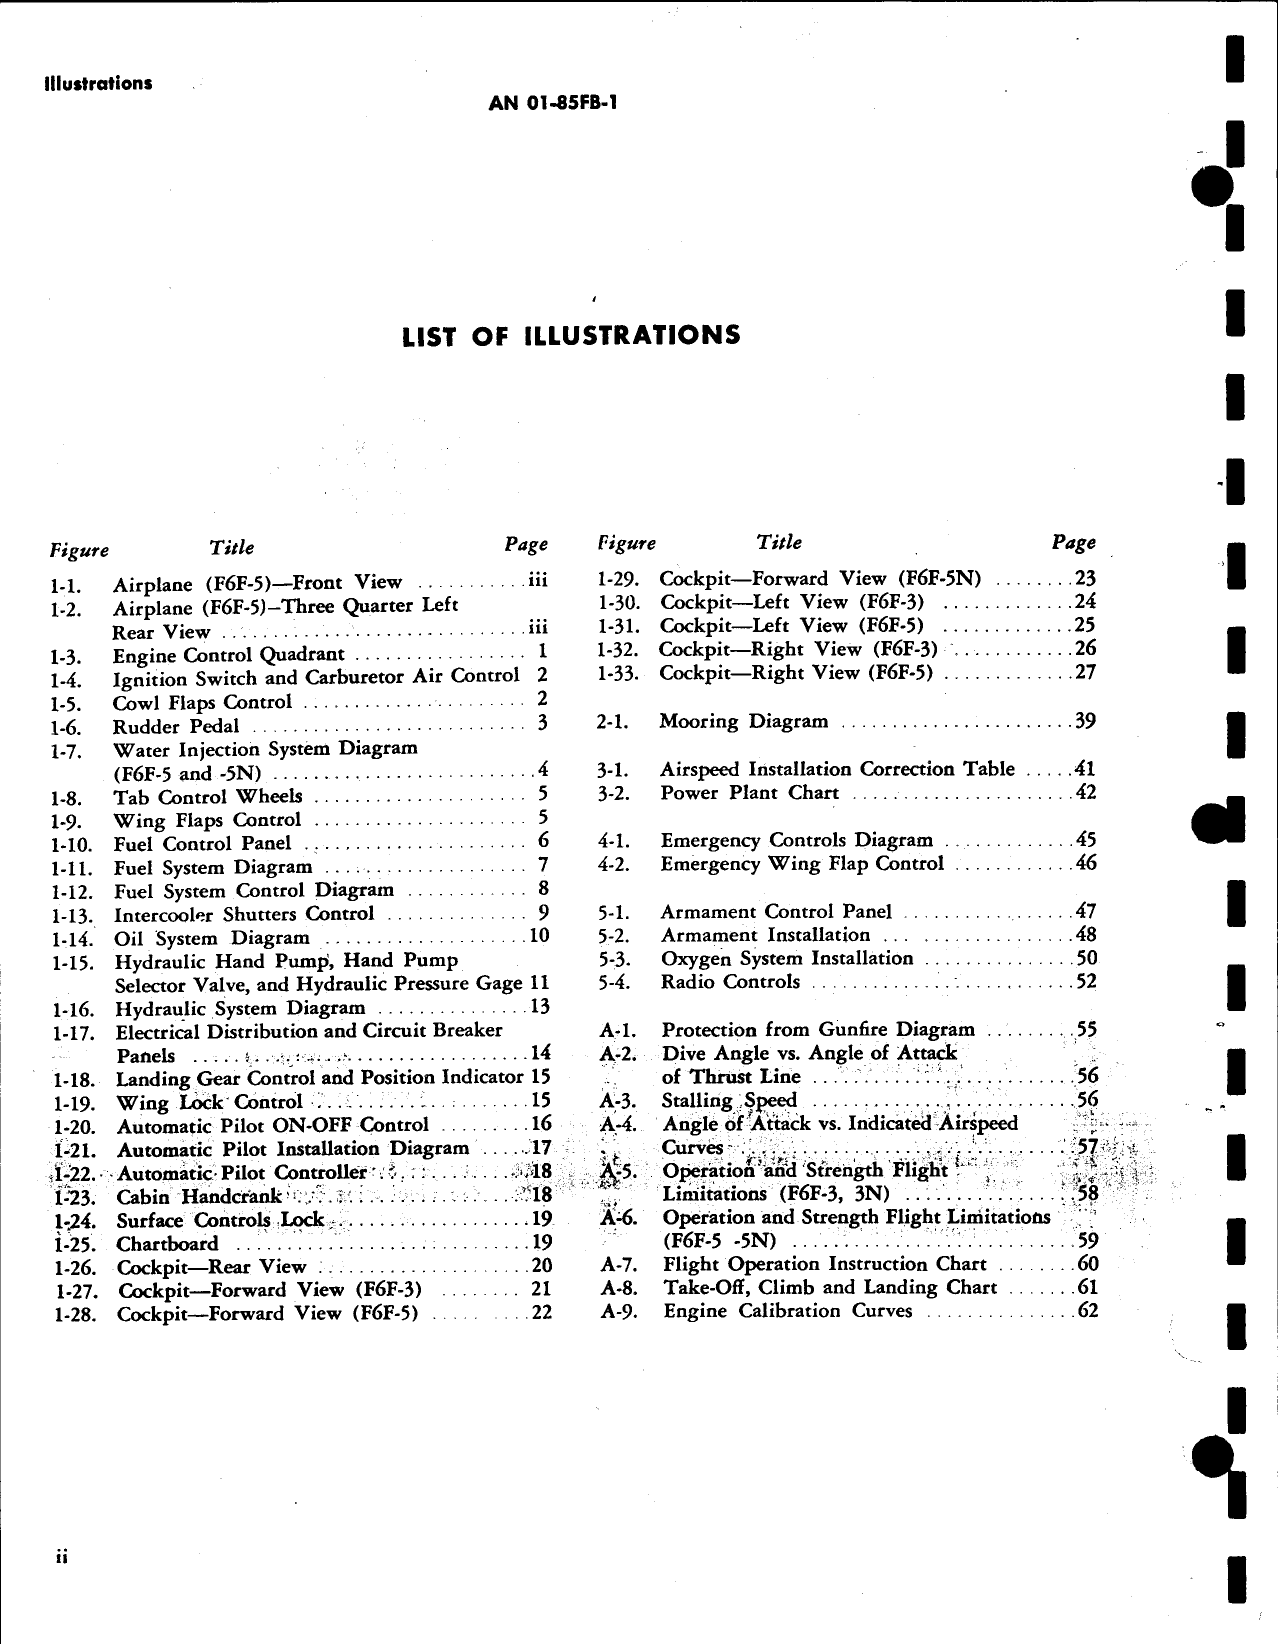 Sample page 8 from AirCorps Library document: Pilot's Handbook for Navy Models F6F-3, F6F-3N, F6F-5 and F6F-5N